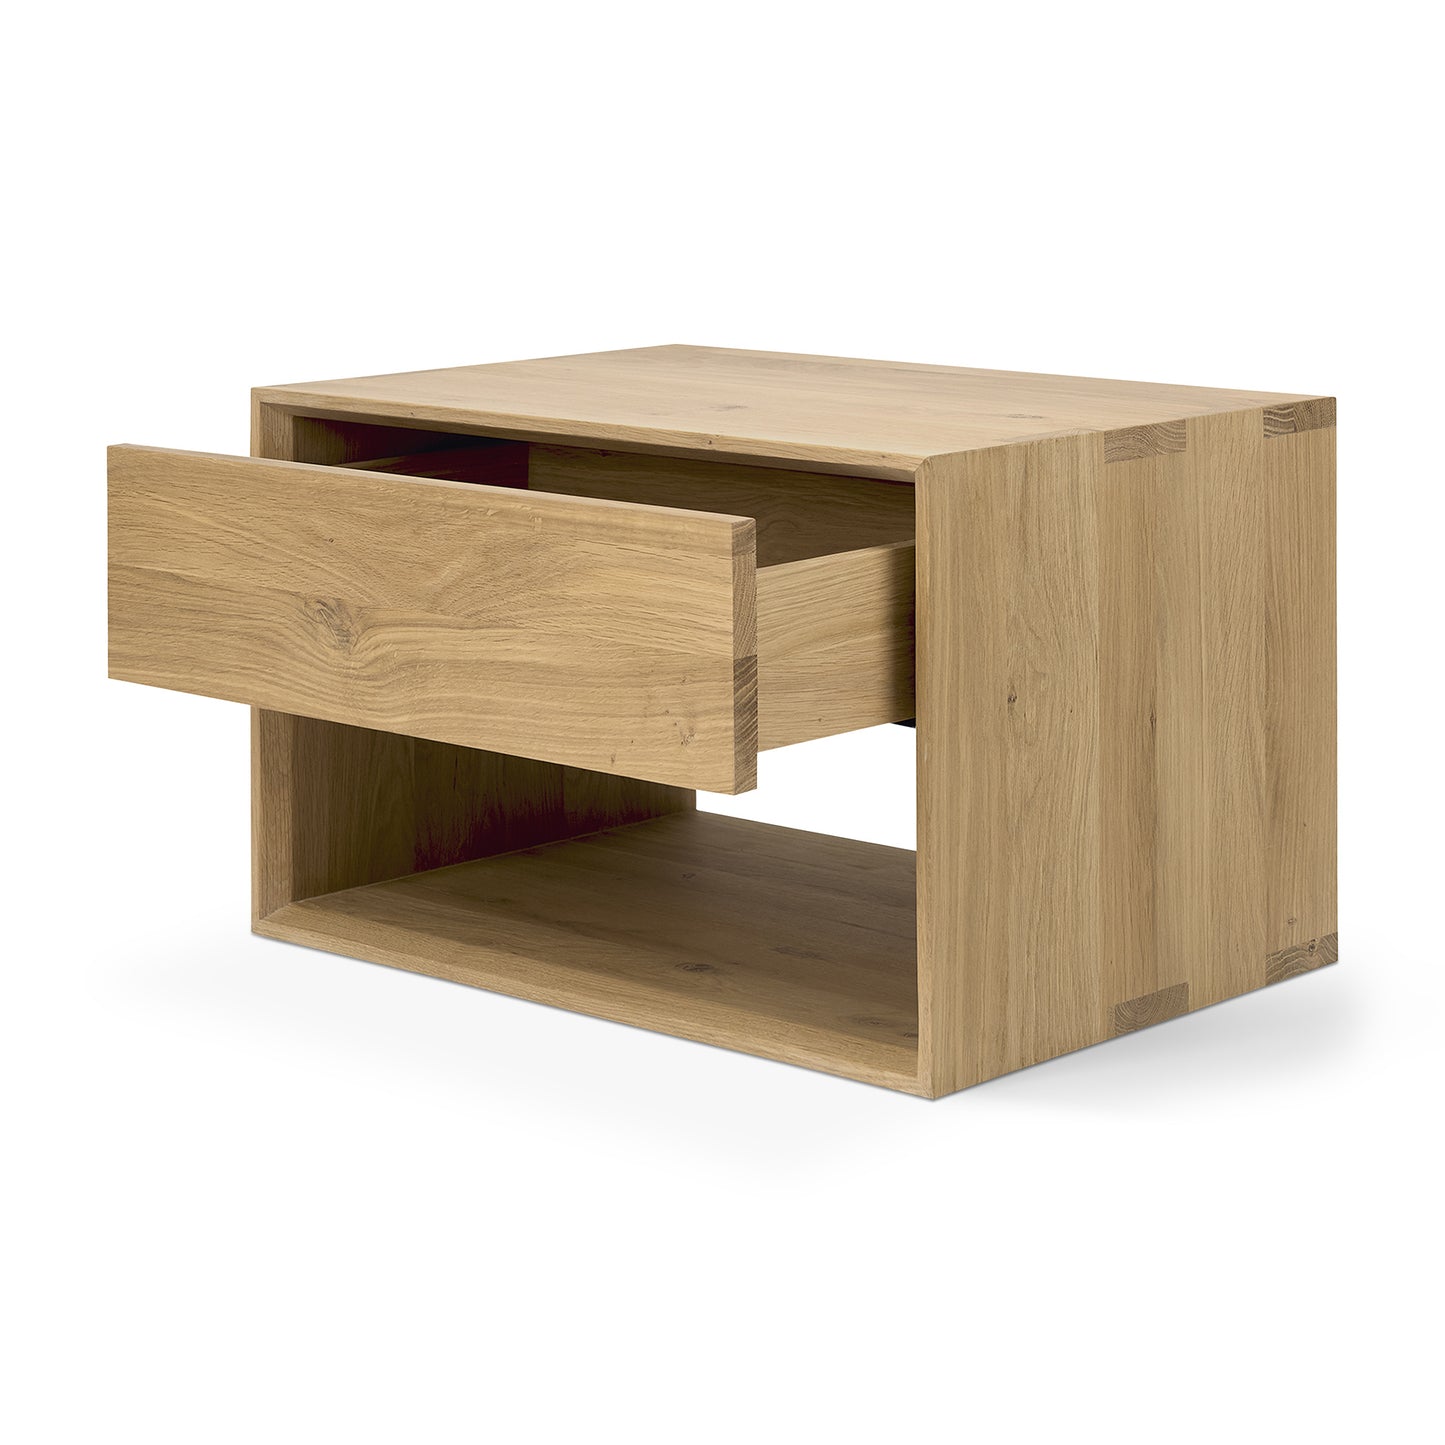 Ethnicraft Oak Nordic ll Bedside Table Nightstand is available from Make Your House A Home, Bendigo, Victoria, Australia